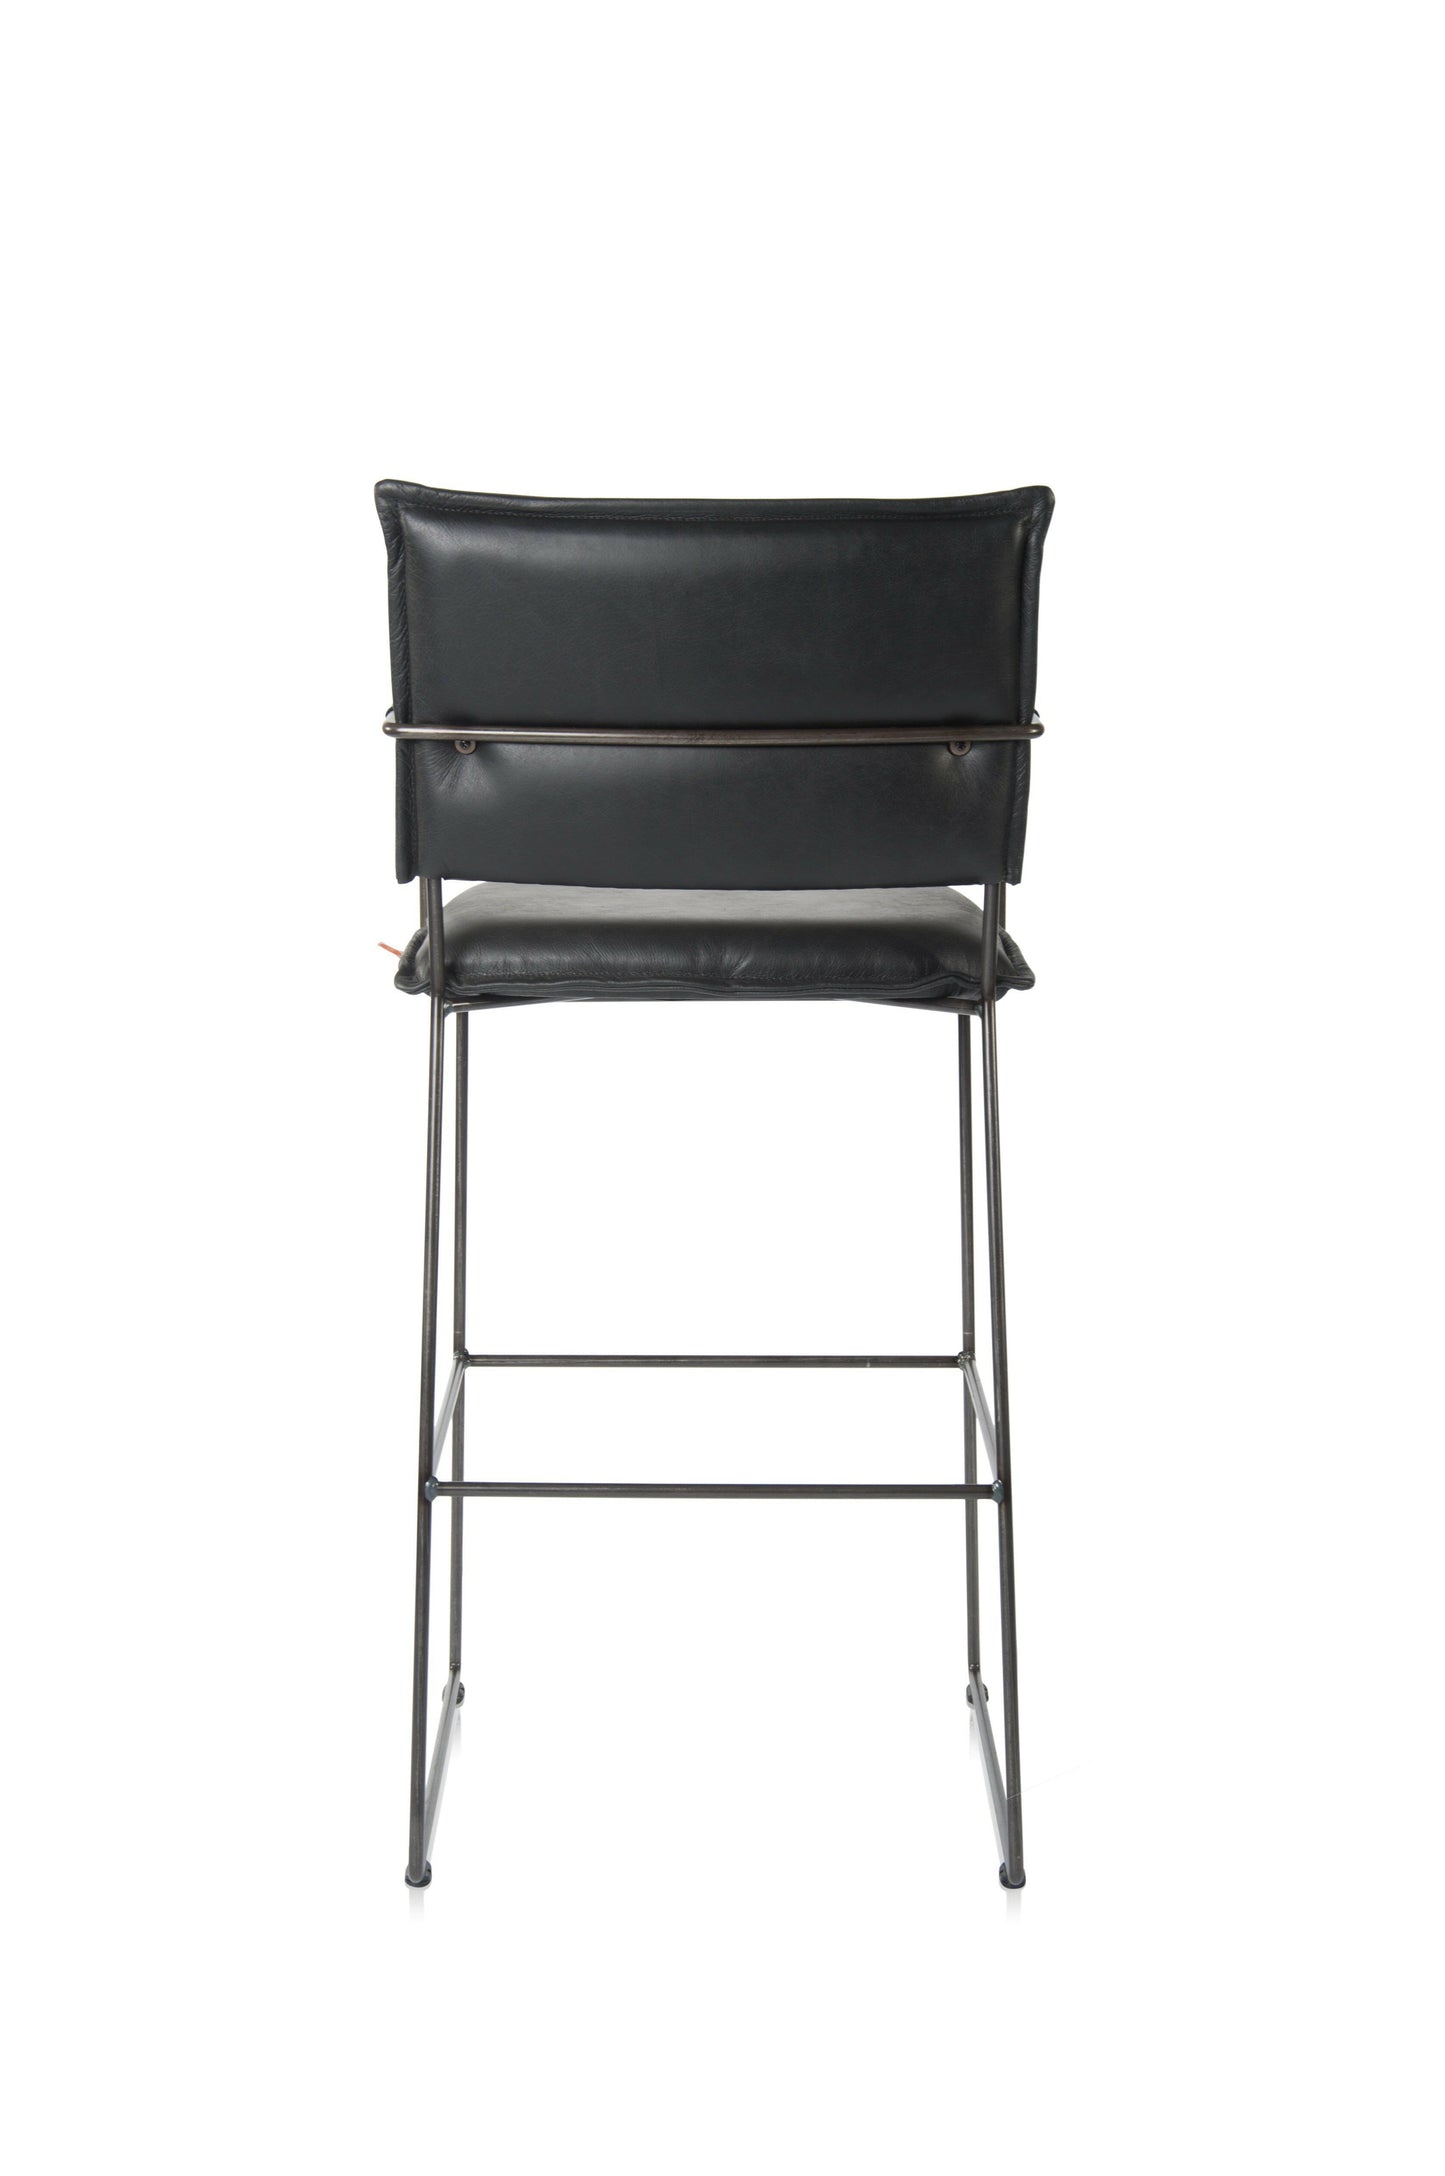 Norman 12mm Old Glory Frame - Bar Stools.